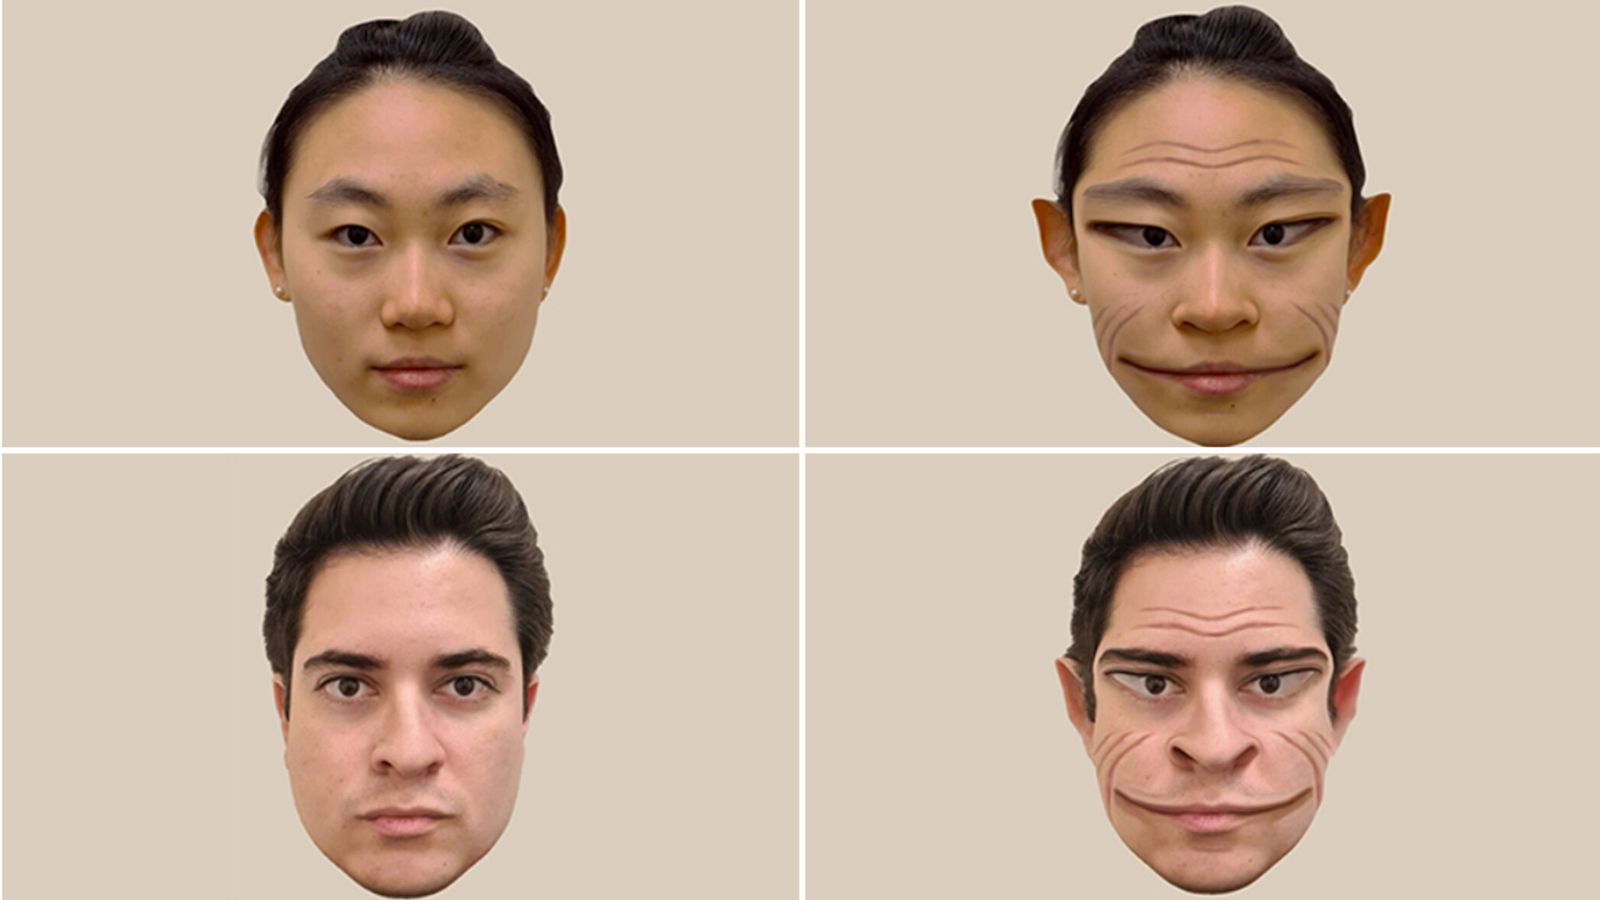 Man sees distorted 'demon-like' faces because of rare neurological disorder